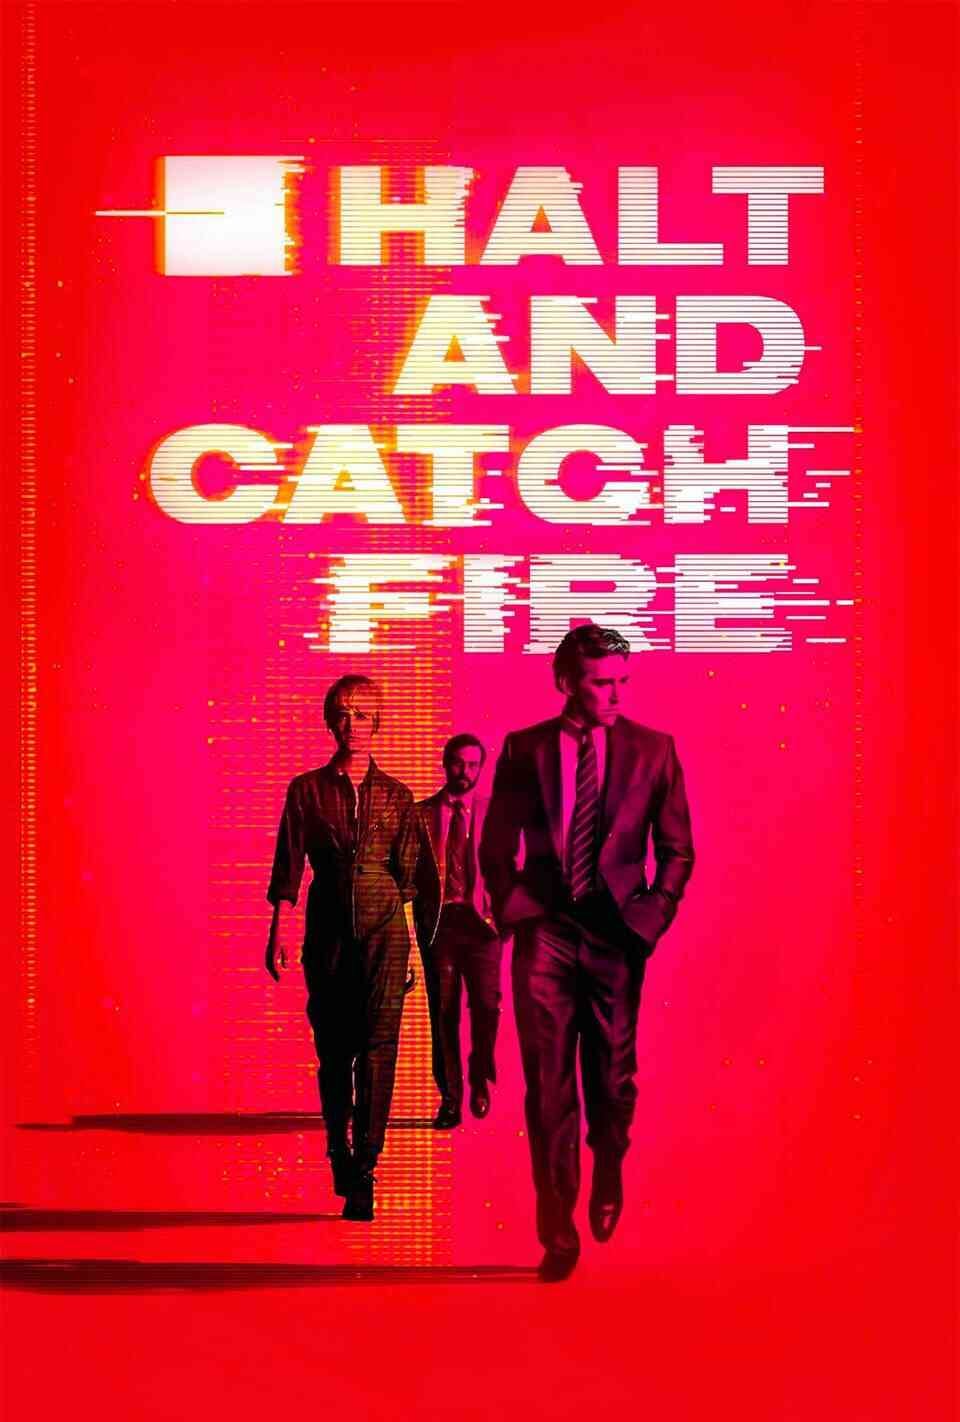 Read Halt and Catch Fire screenplay (poster)